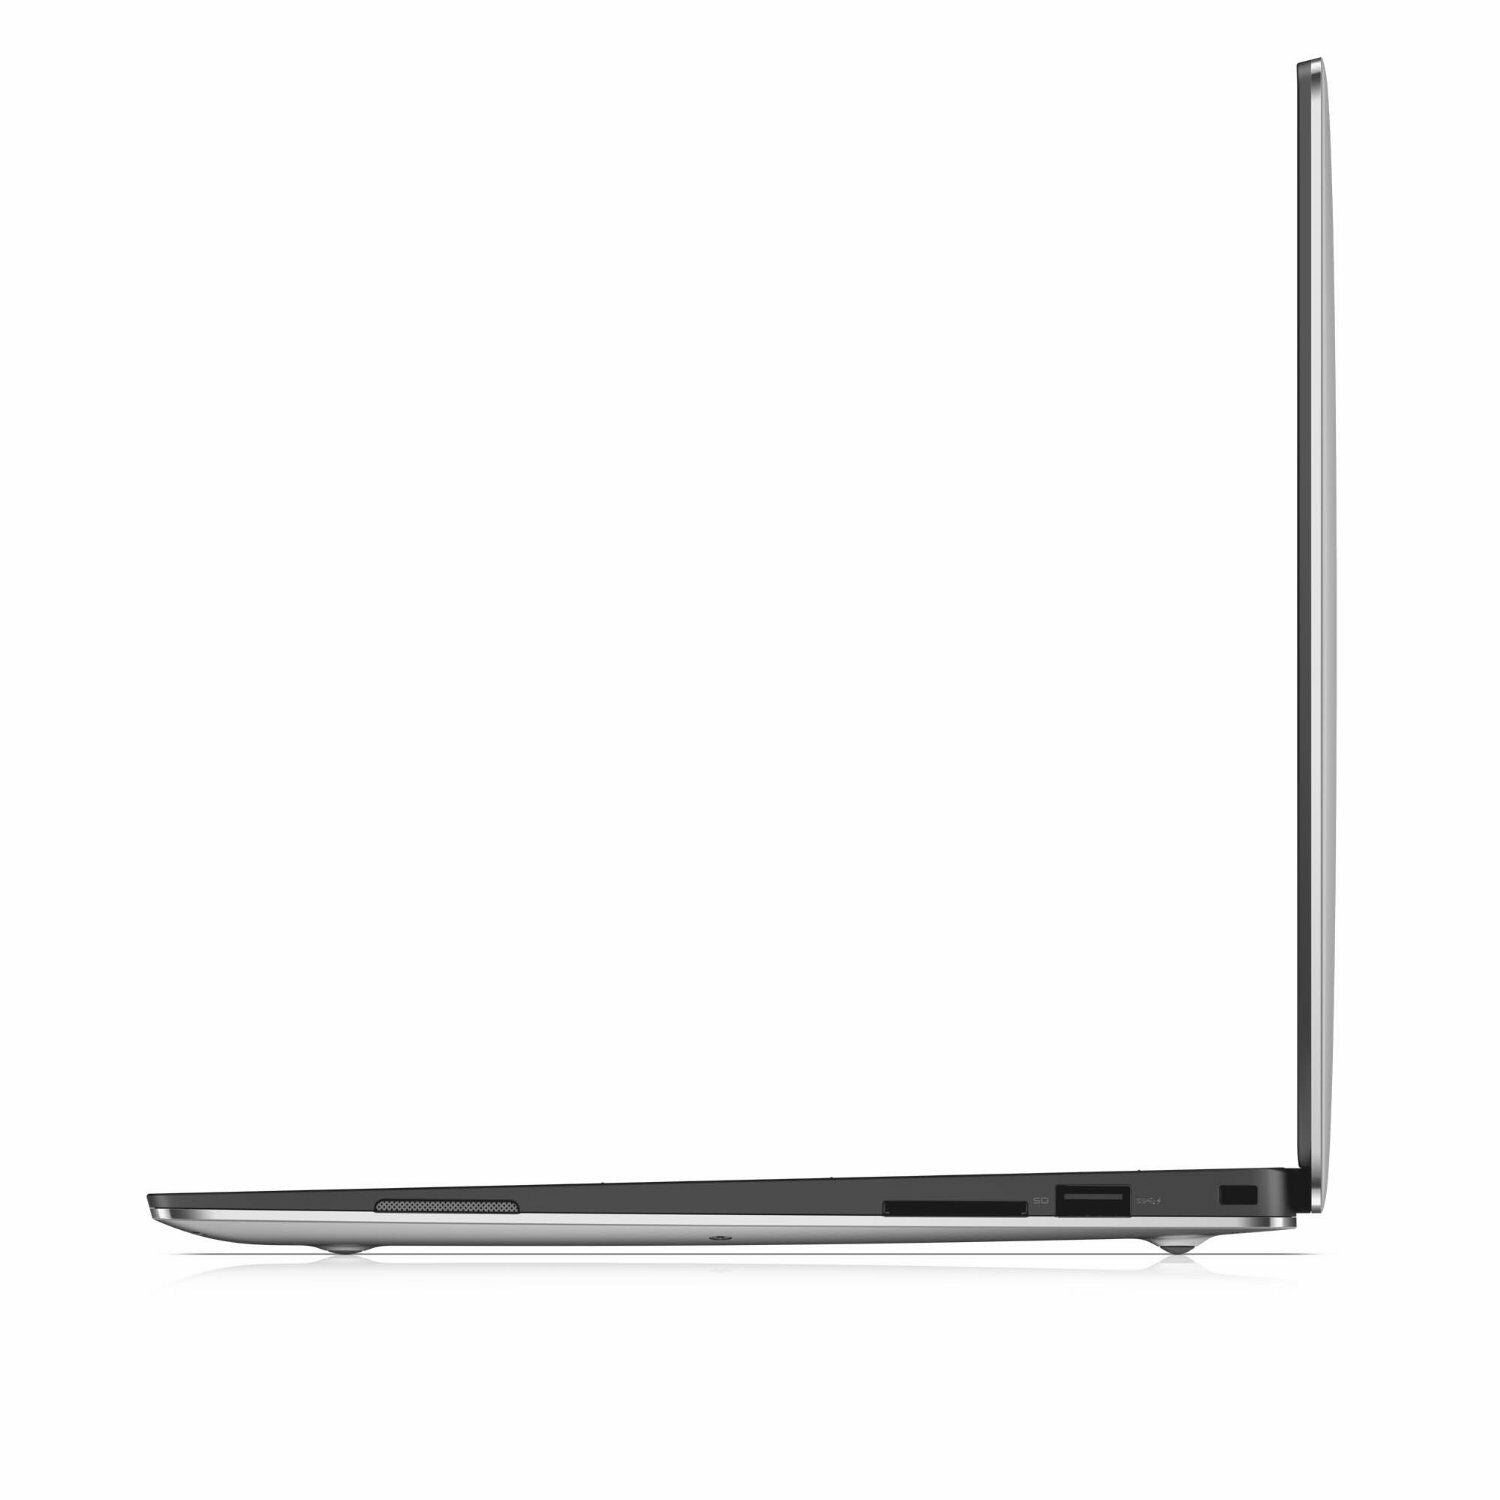 Dell XPS 13" Touch Screen Laptop Core i5-7200U 2.5GHz 8GB RAM 119GB SSD, Silver